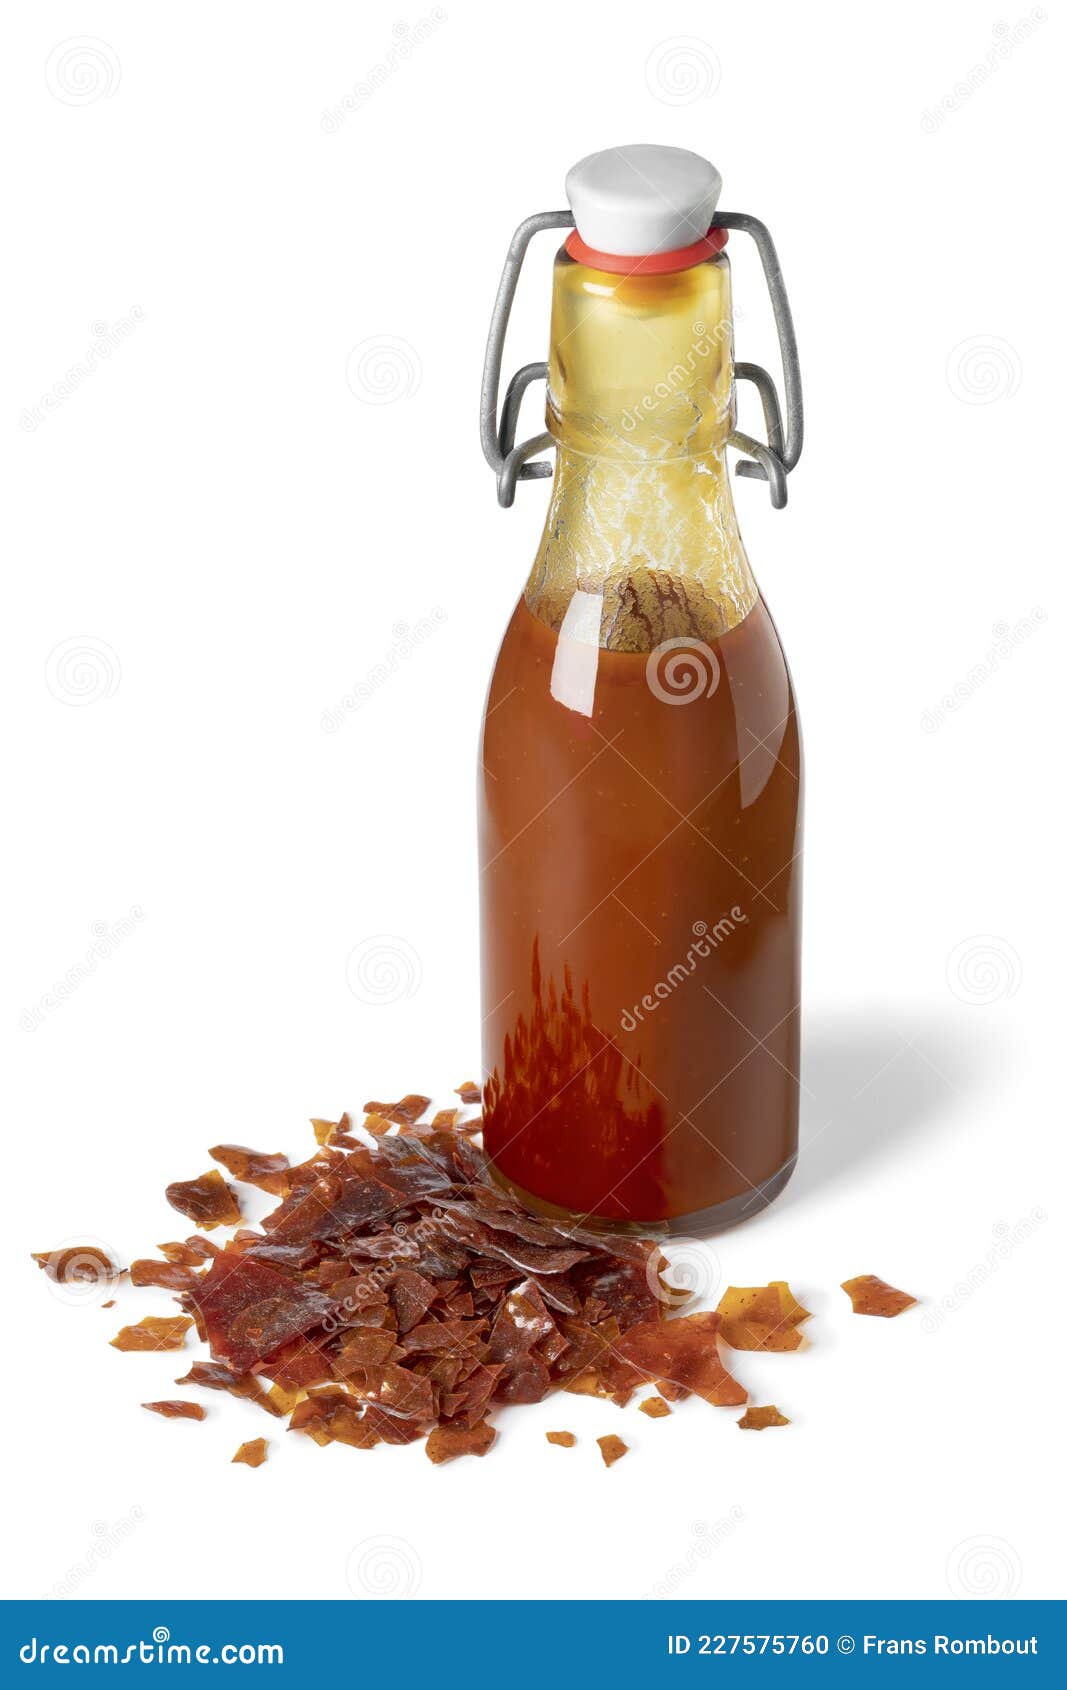 bottle of brown shellac liquid on white background